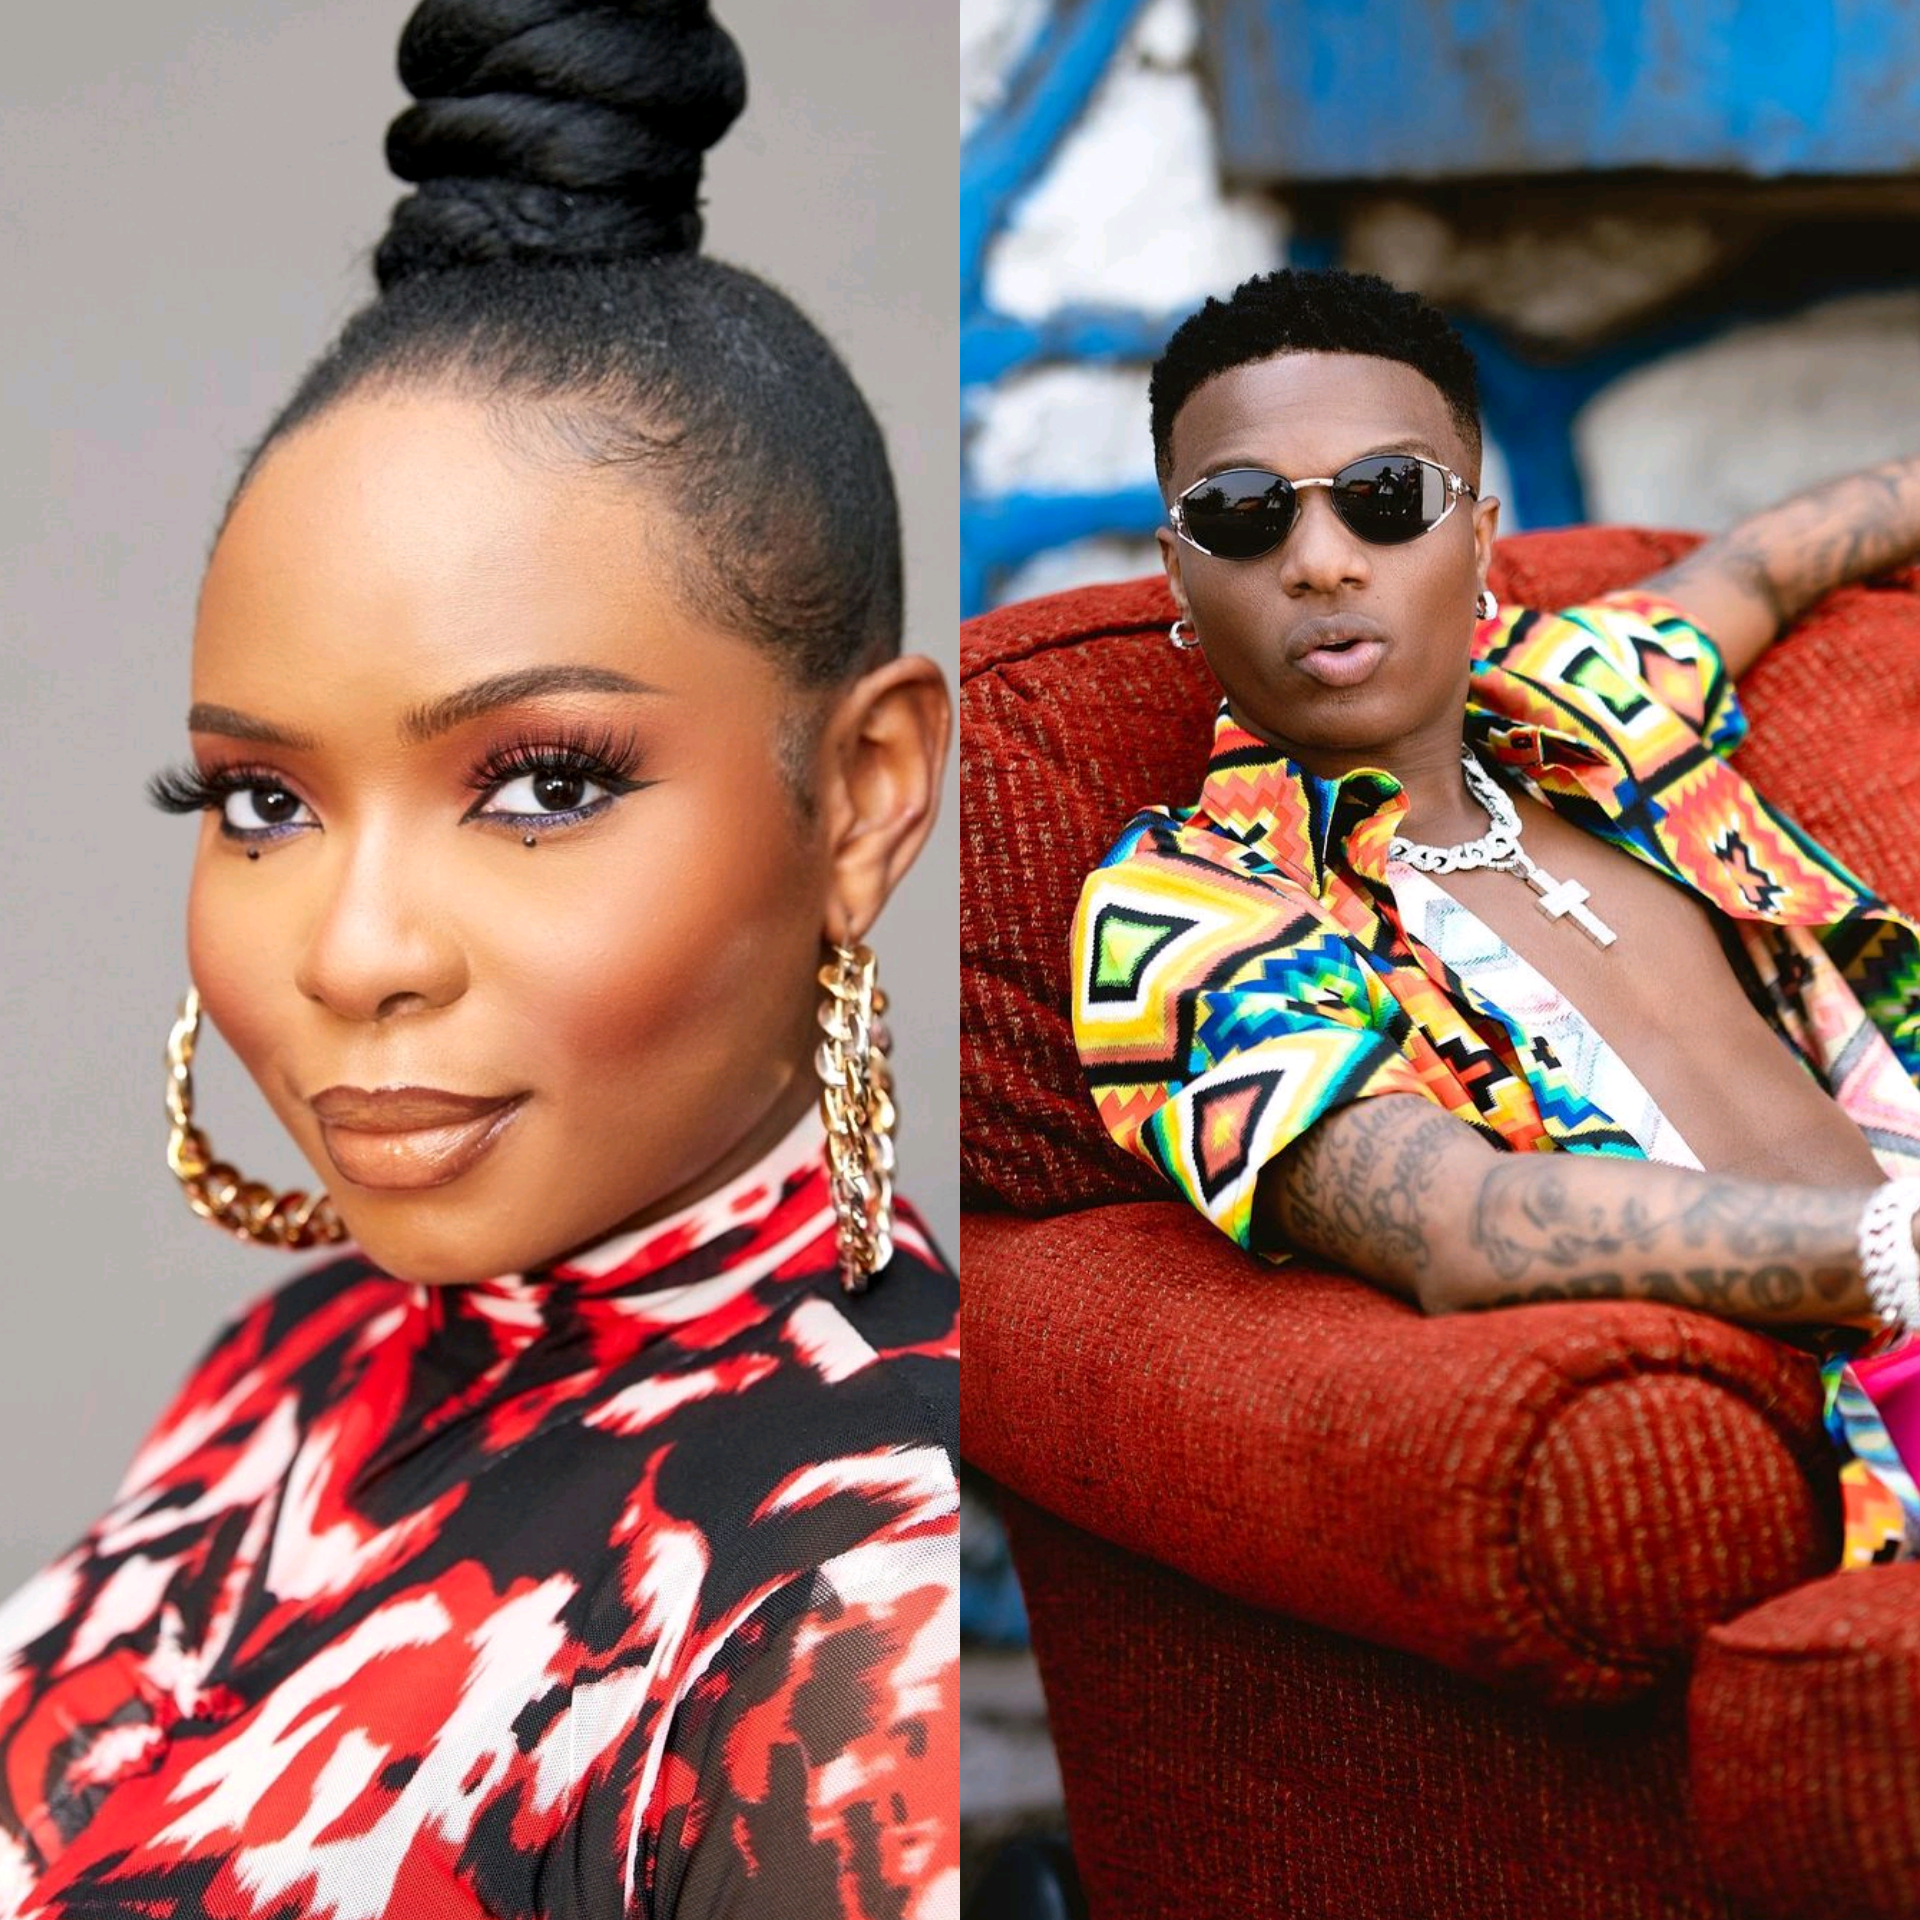 Why I Have More Instagram Followers Than Wizkid - Yemi Alade